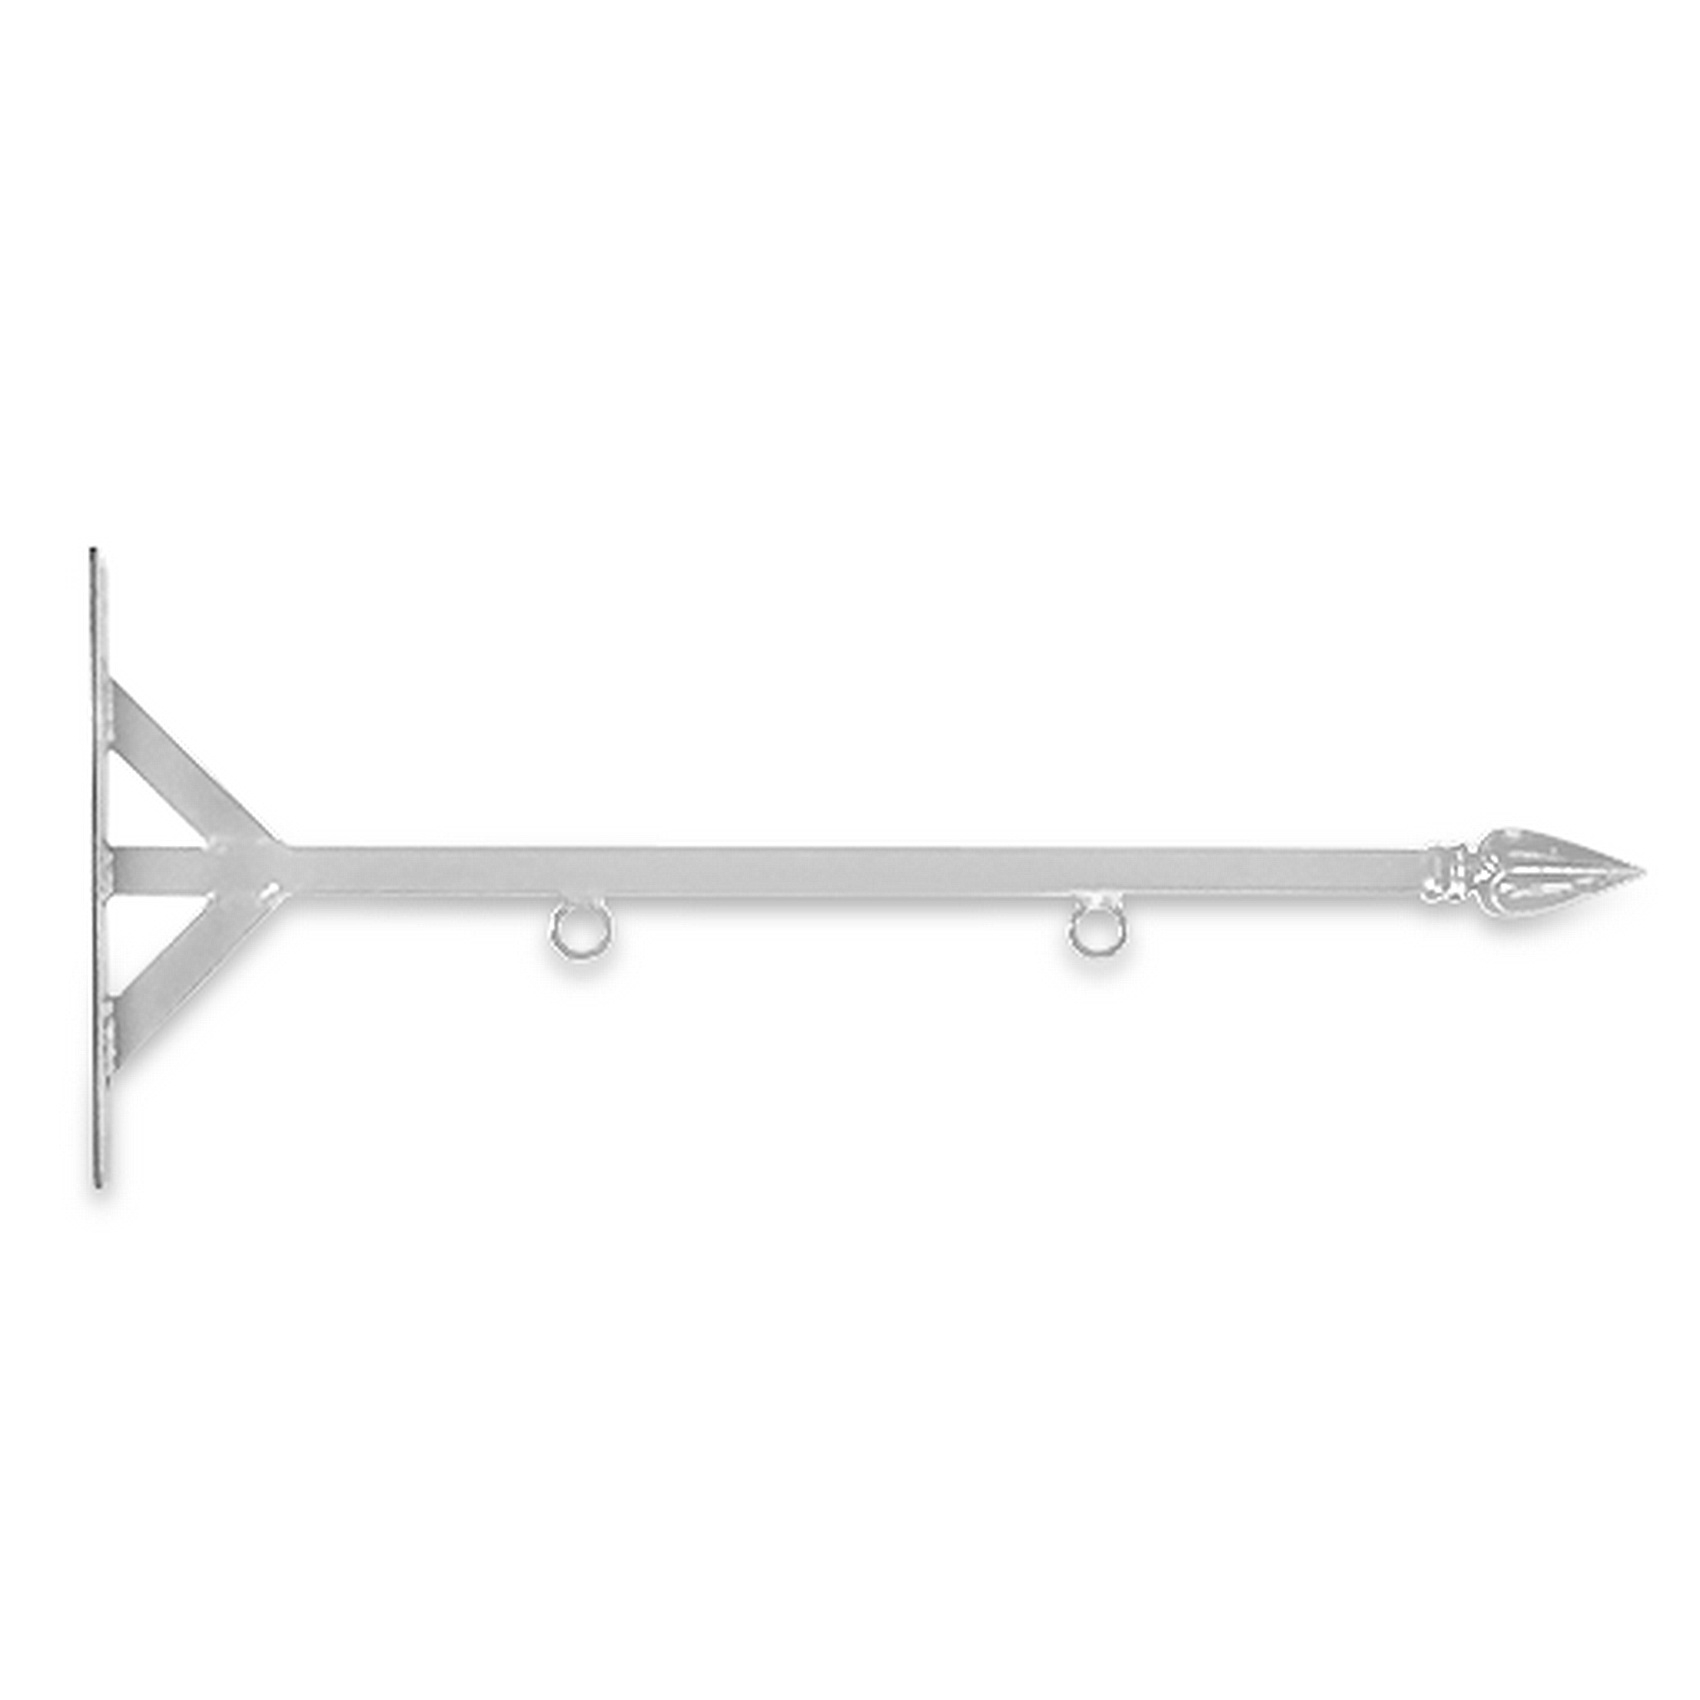 24'' Gray Horizontal Straight Shaft Steel Bracket with Spear Point Finial